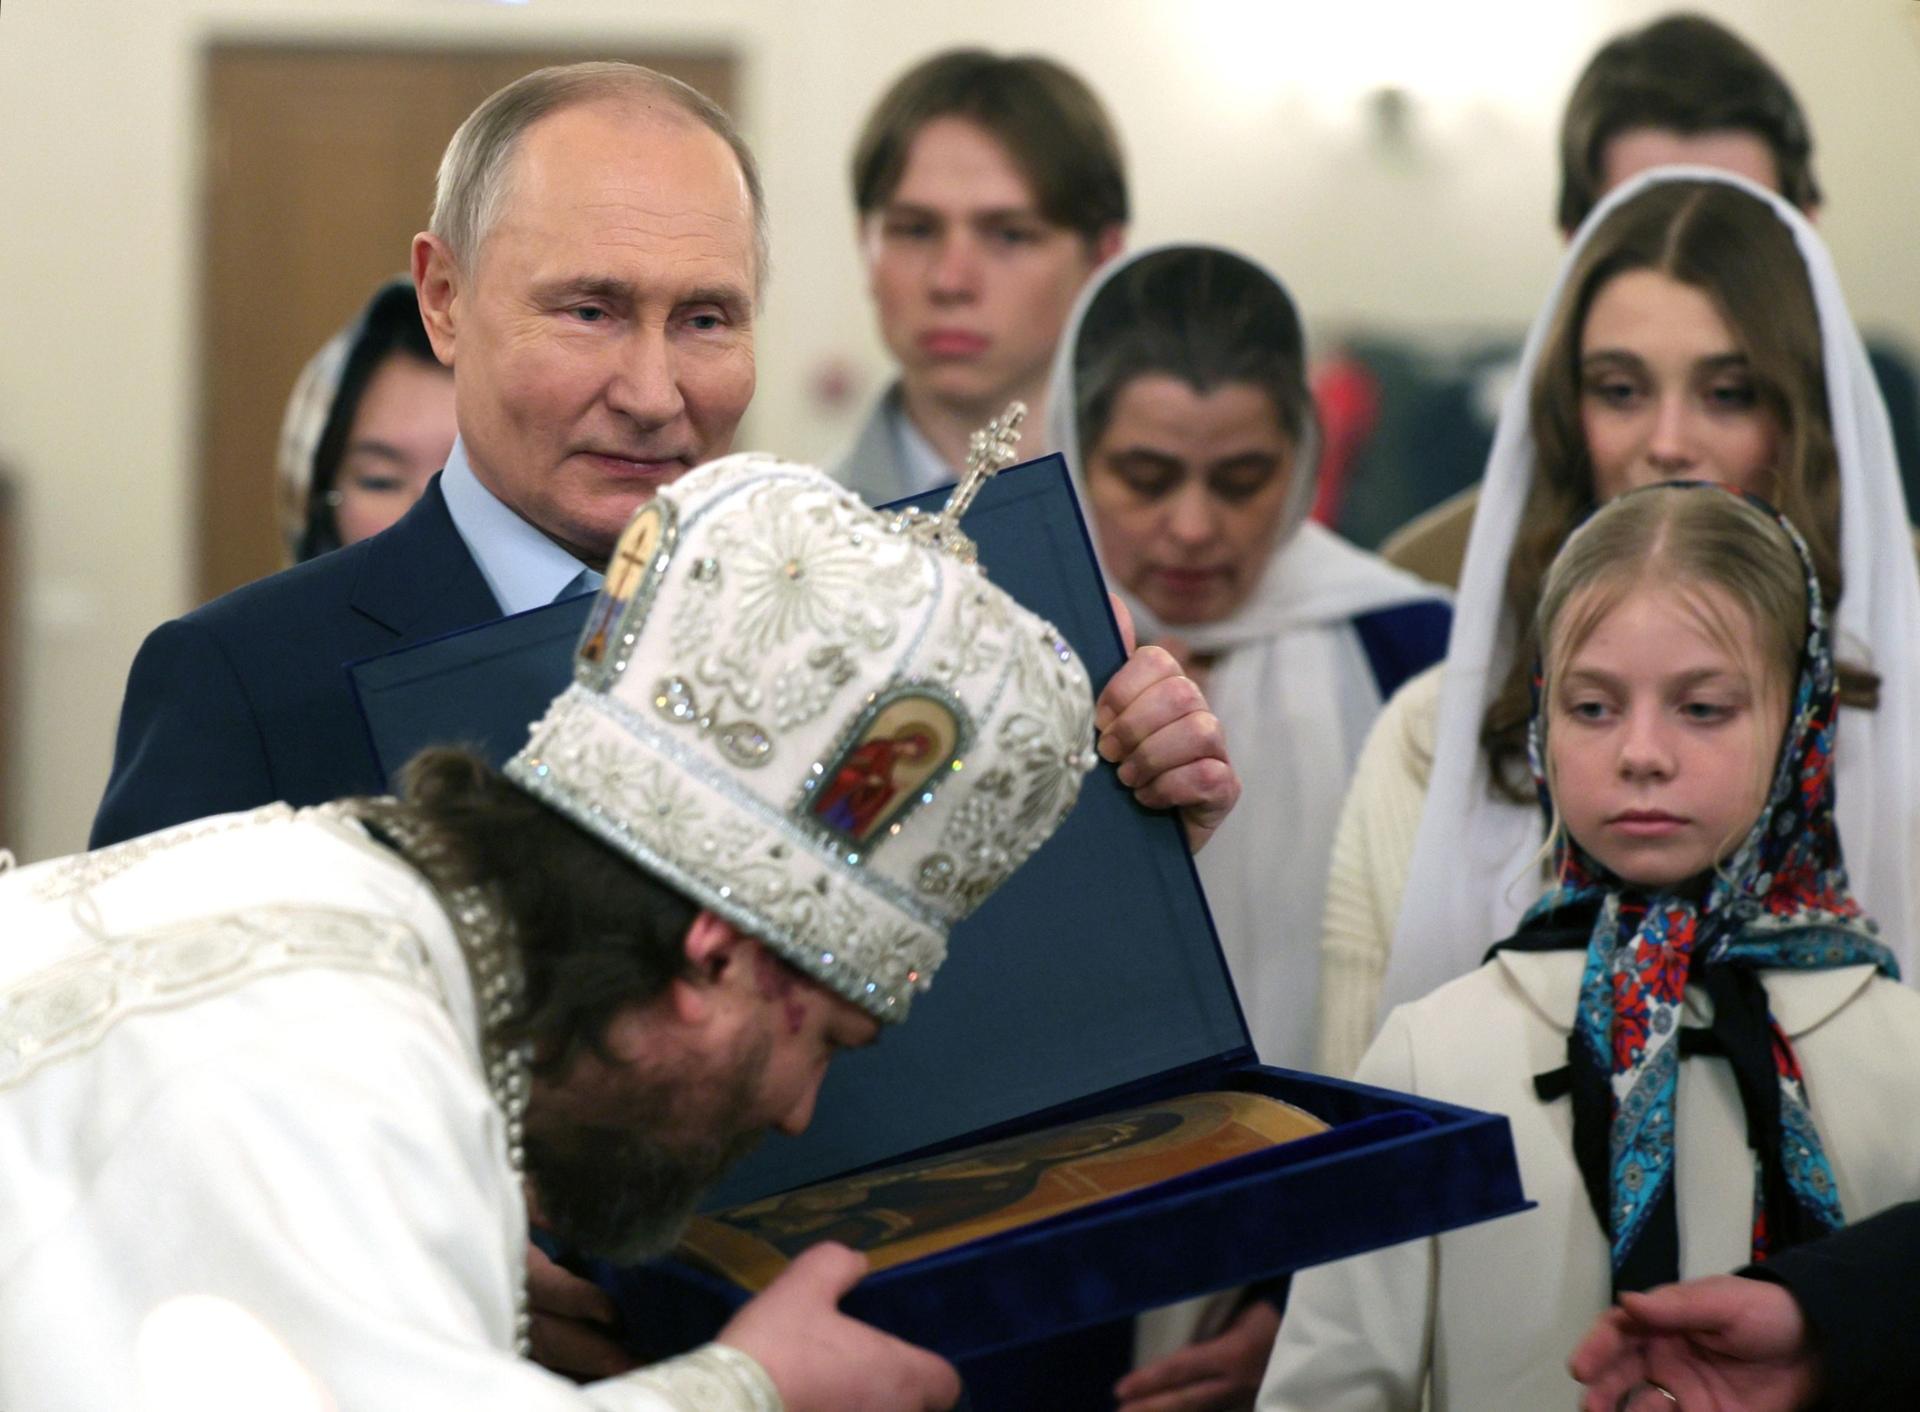 Russian Orthodox Archbishop of Odintsovo and Krasnogorsk Foma (Nikolay Mosolov), foreground, kisses an icon as Russian President Vladimir Putin, left, stands near after attending an Orthodox Christmas service.